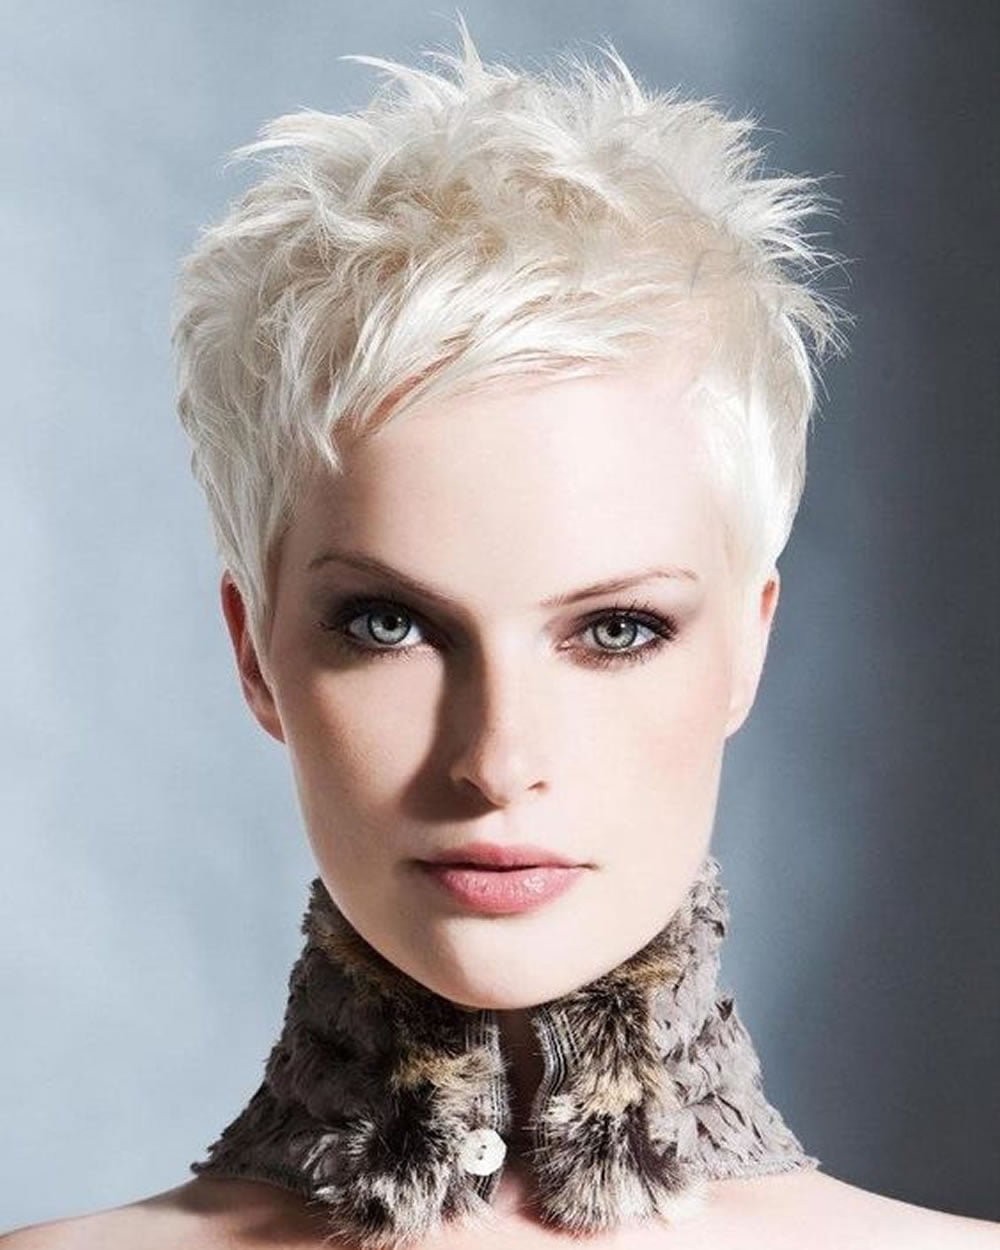 Super Very Short Pixie Haircuts And Short Hair Colors 2018 2019 Hairstyles 